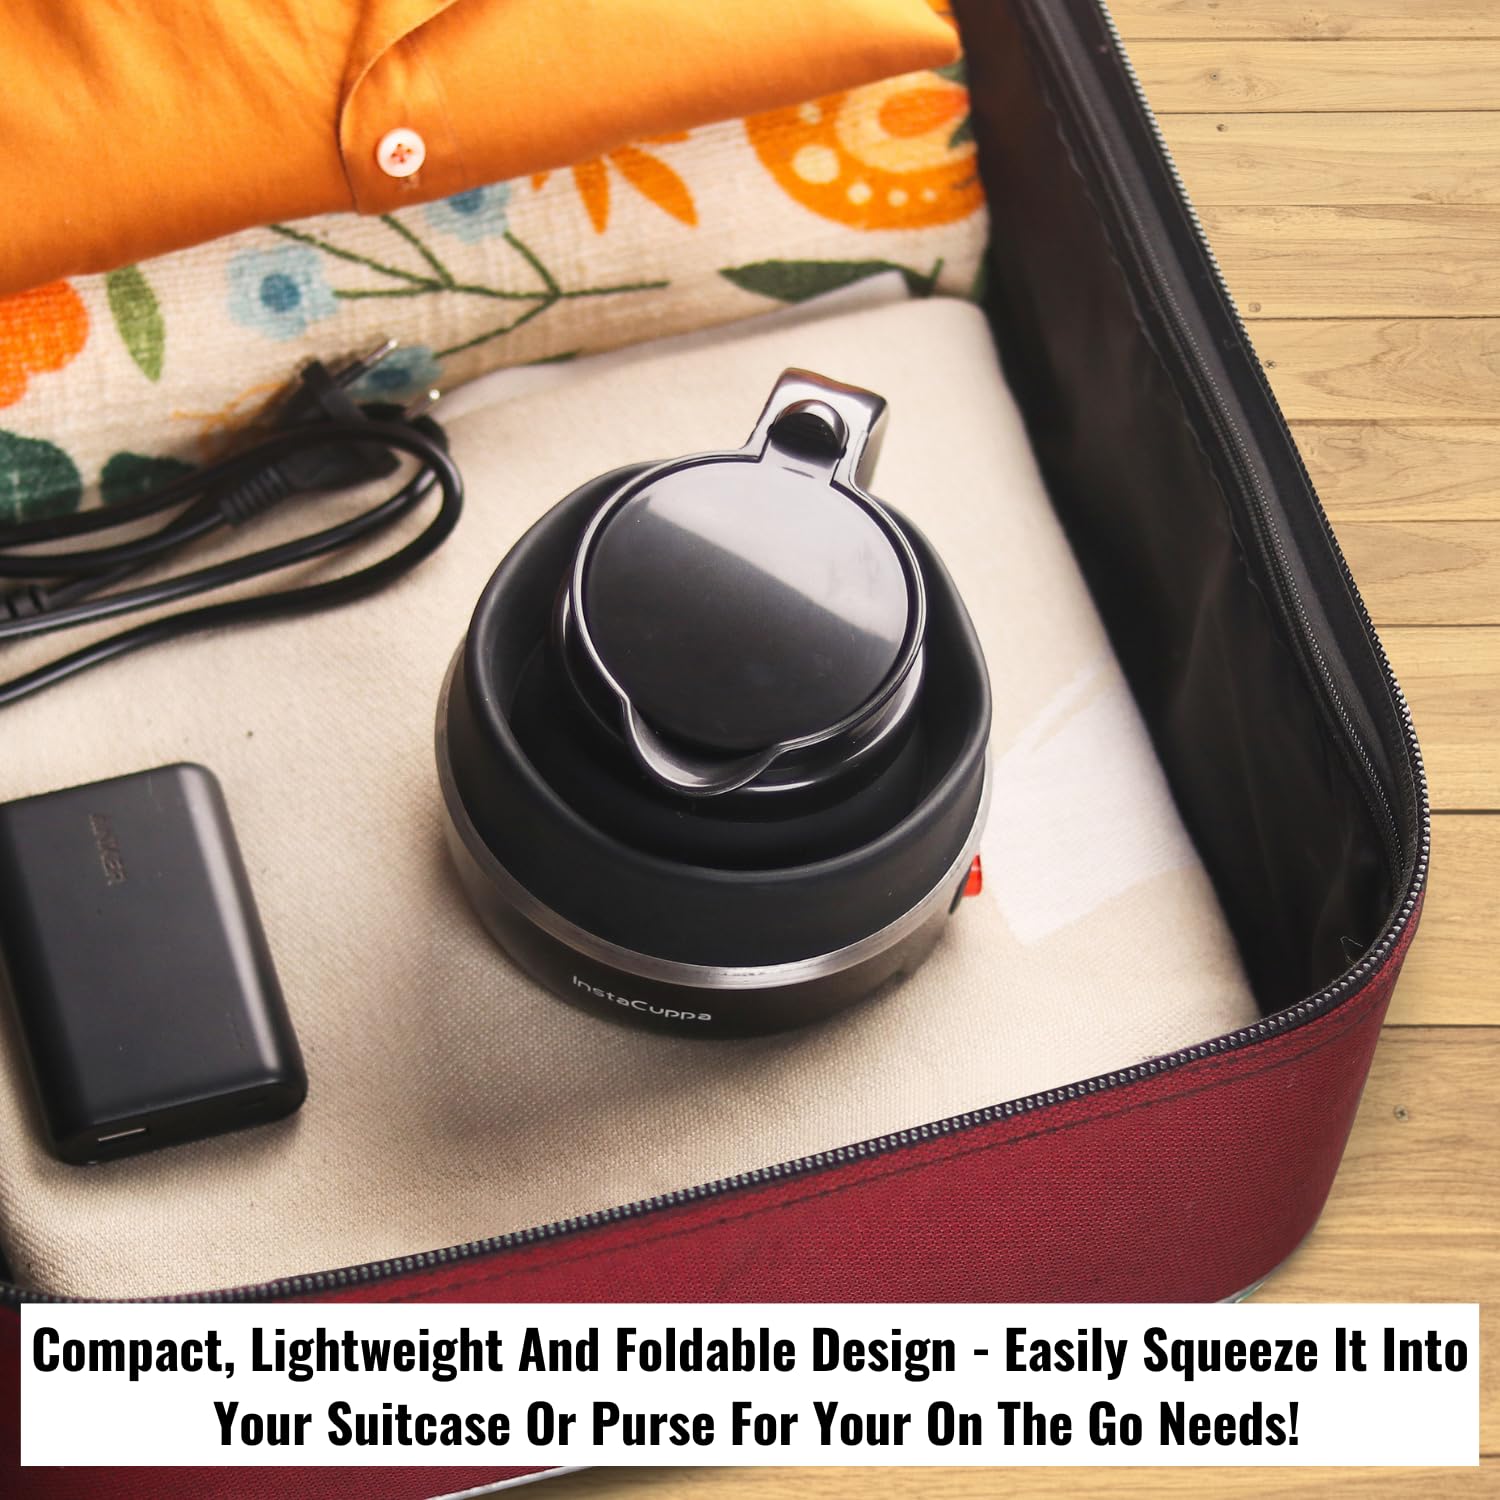 InstaCuppa Portable Electric Kettle: The Perfect Travel Companion